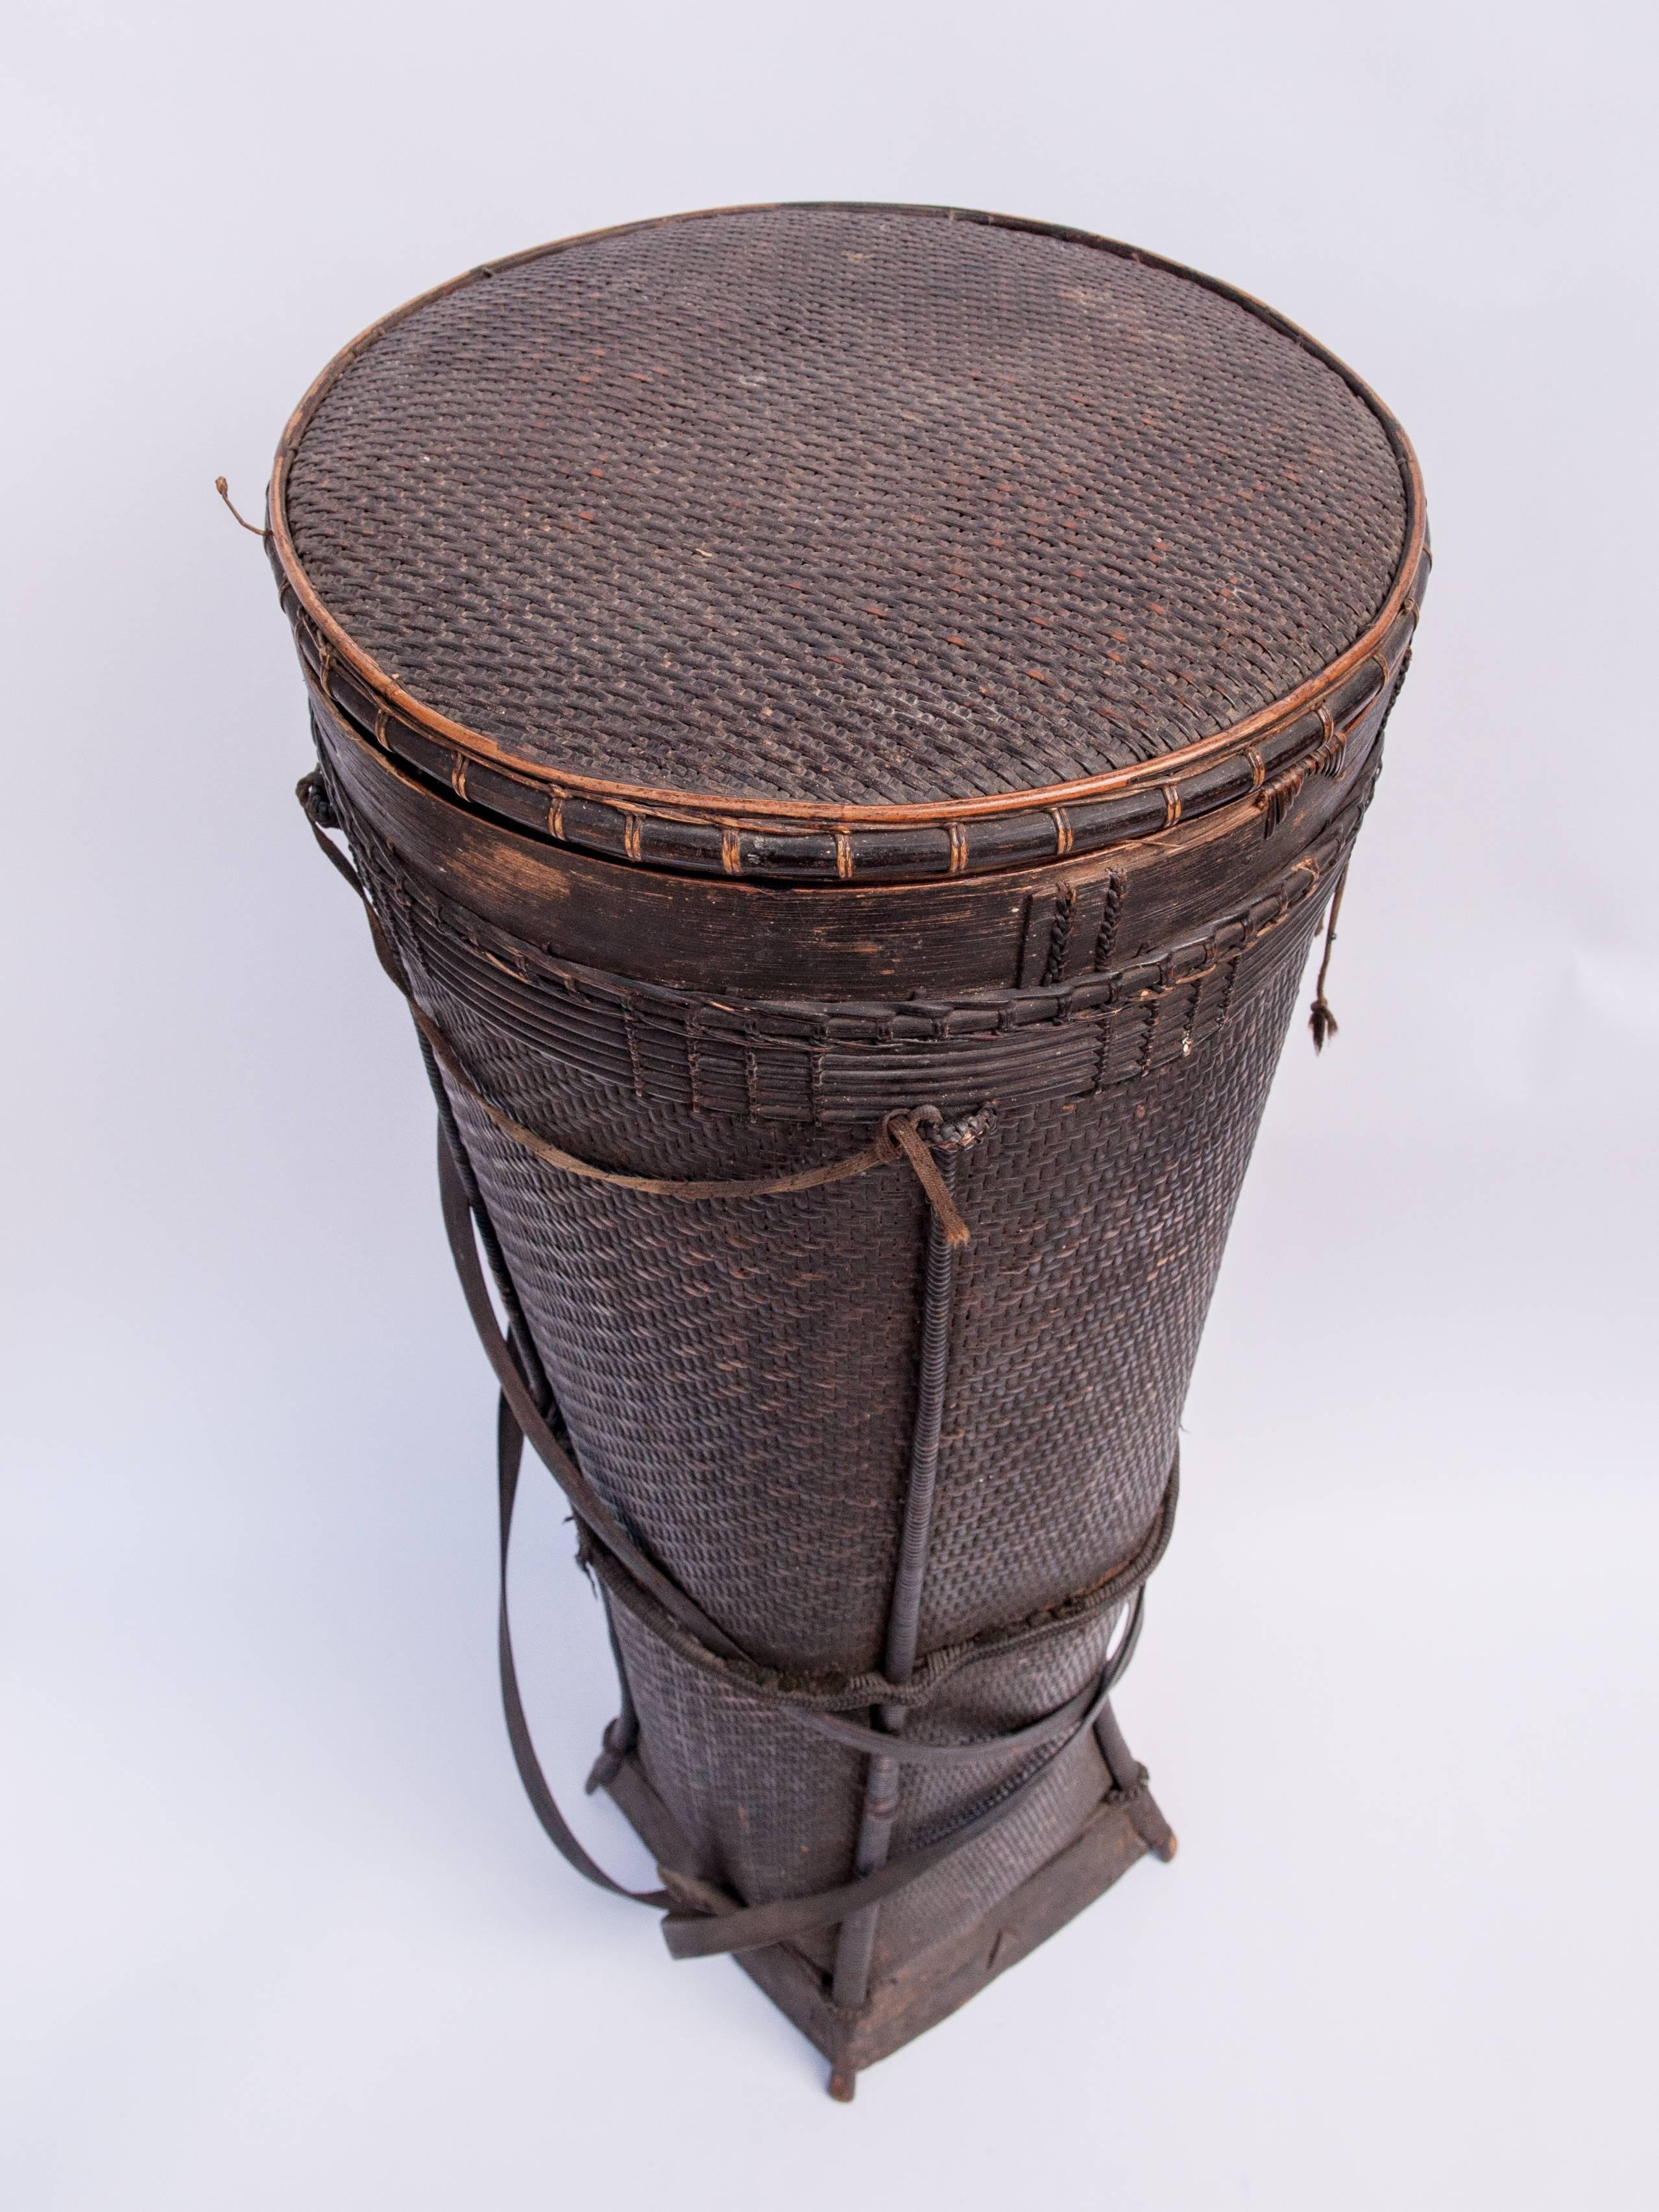 Tall Tribal Storage Basket with Lid from Laos, Mid-20th Century 1